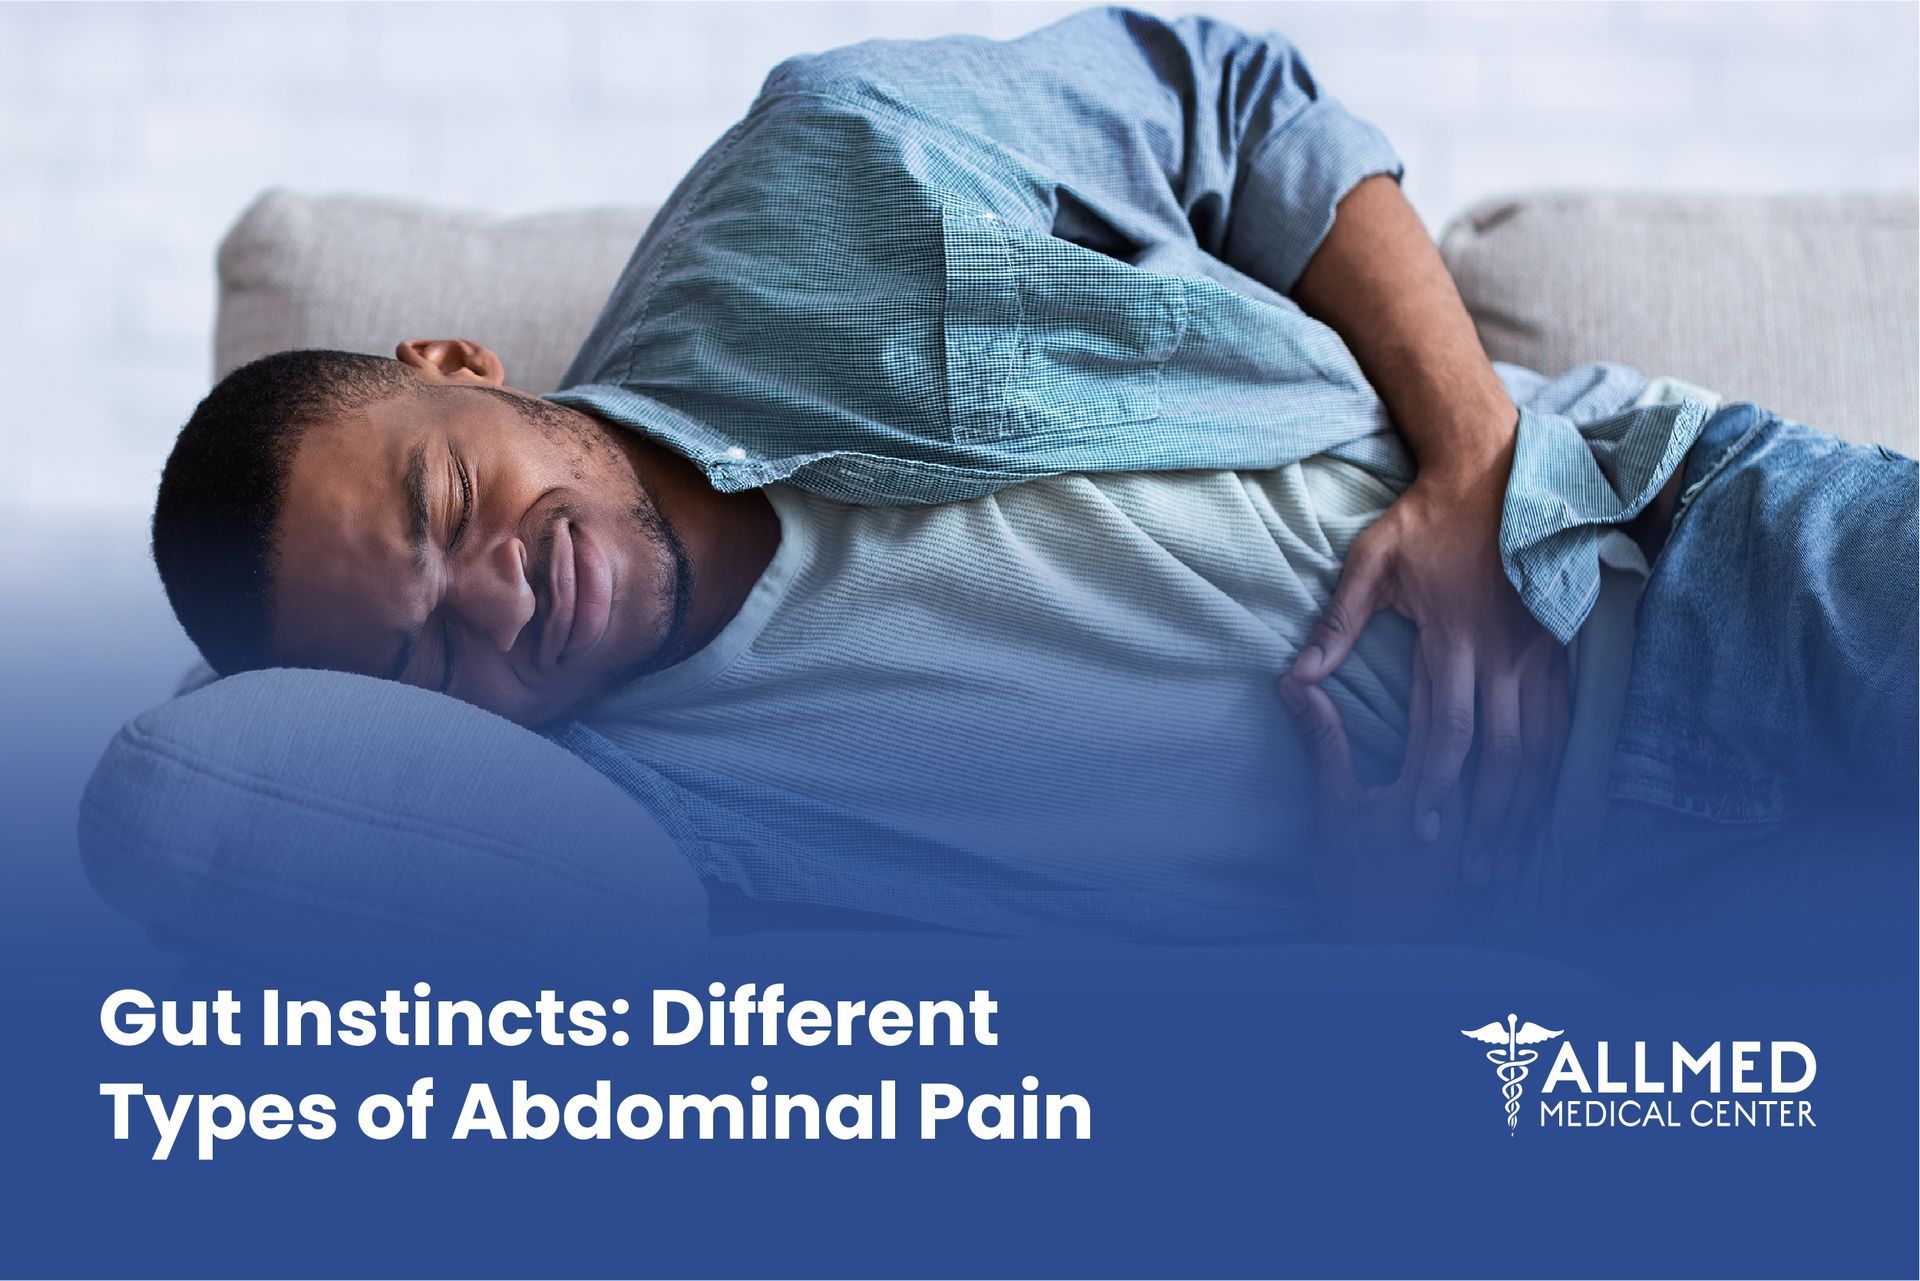 Gut Instincts: Different Types of Abdominal Pain